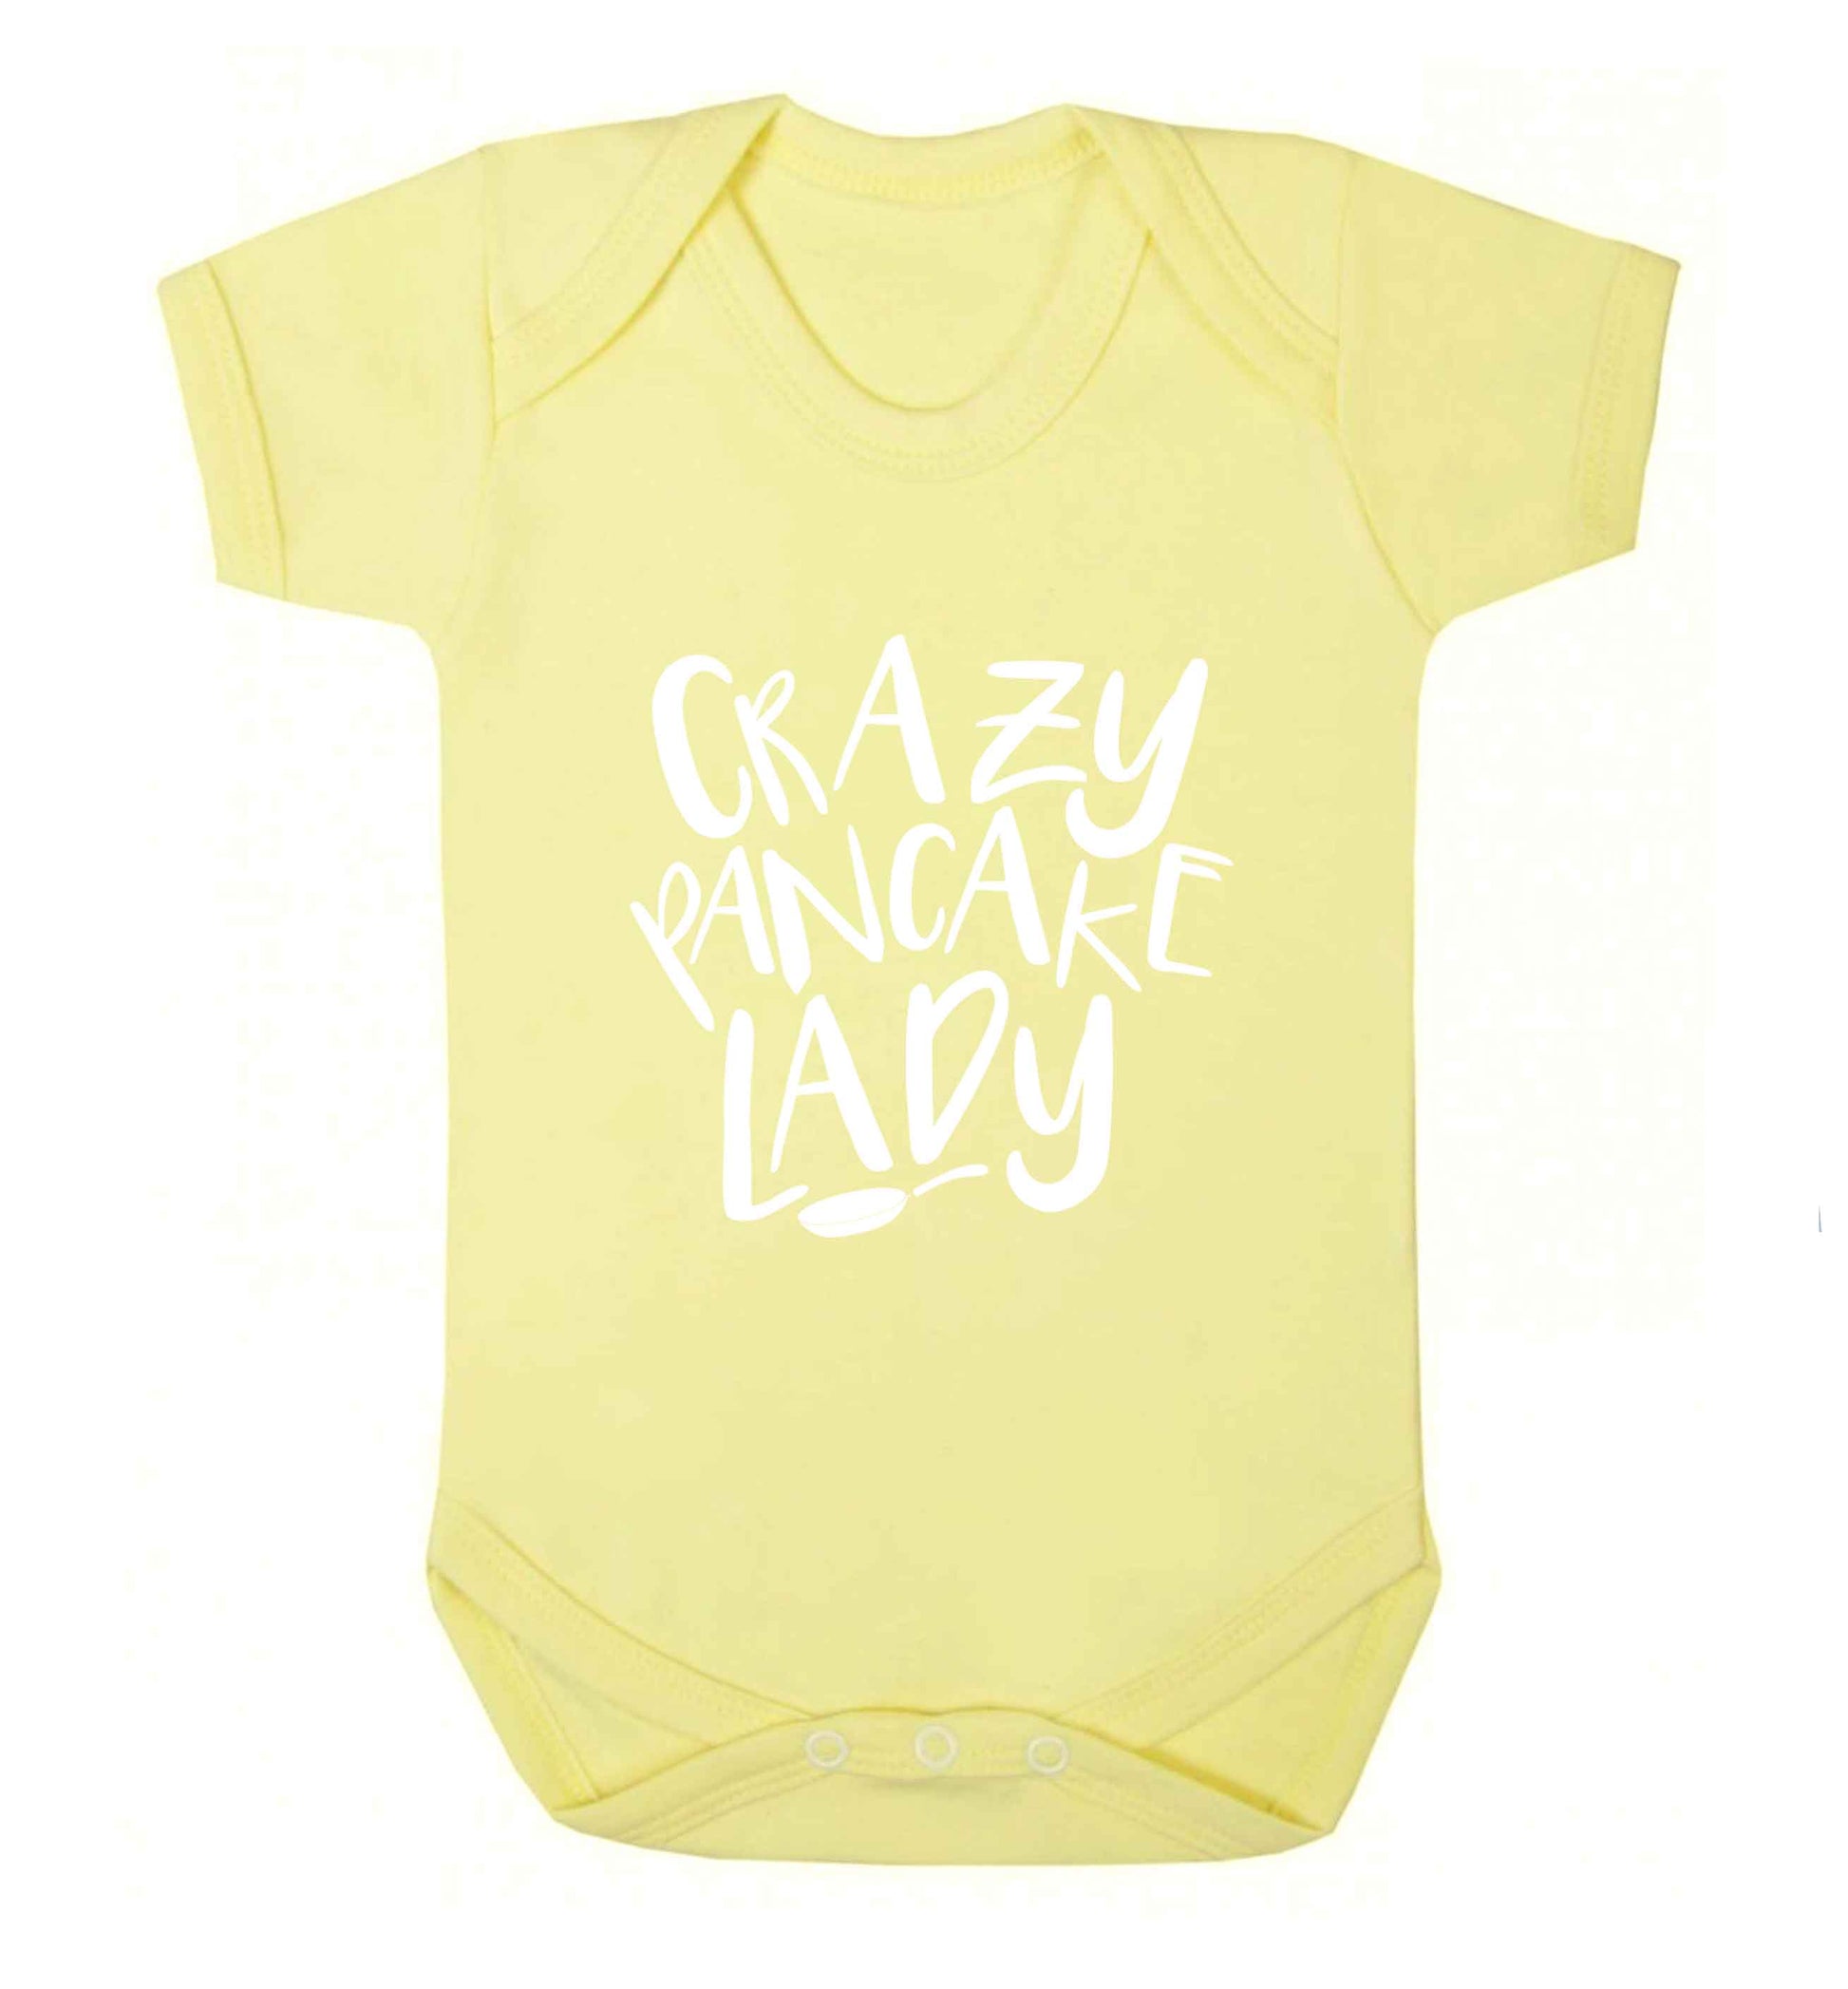 Crazy pancake lady baby vest pale yellow 18-24 months